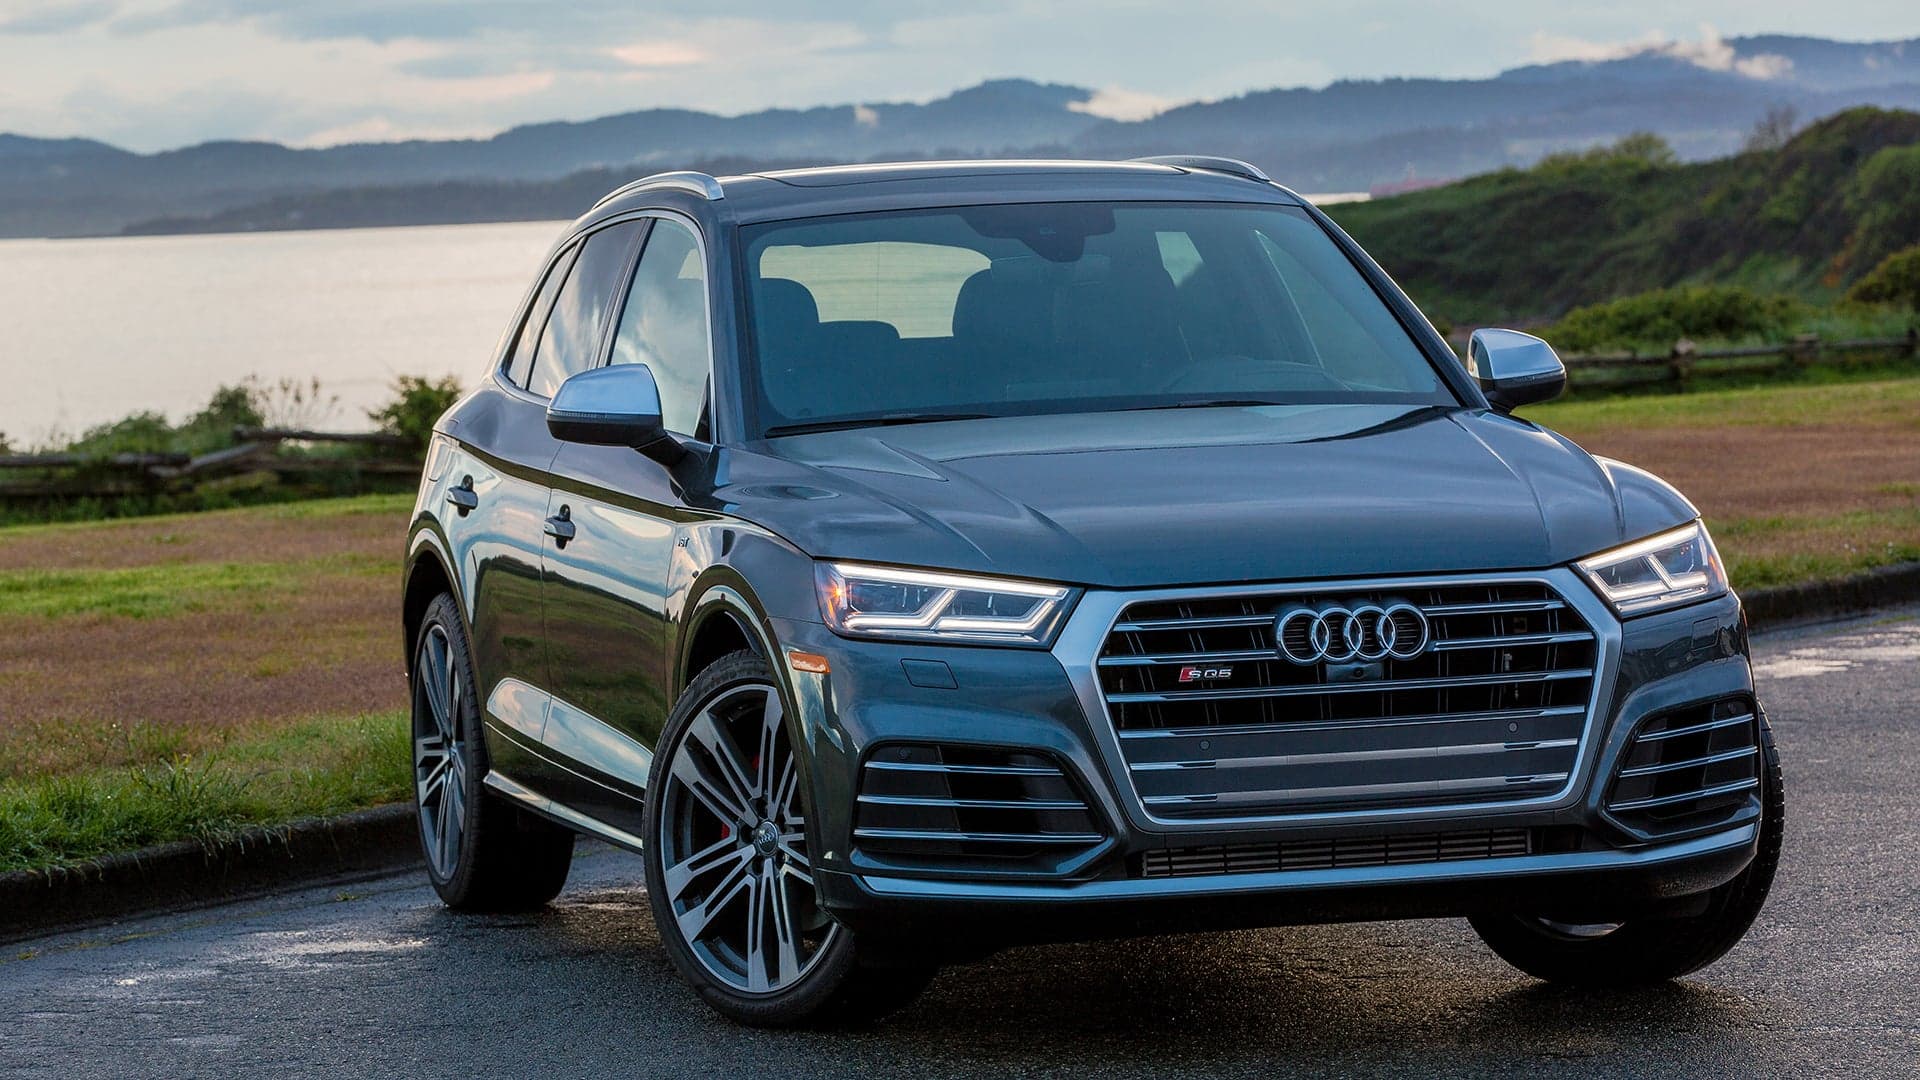 2018 Audi SQ5 First Drive Review: 7 Things to Know